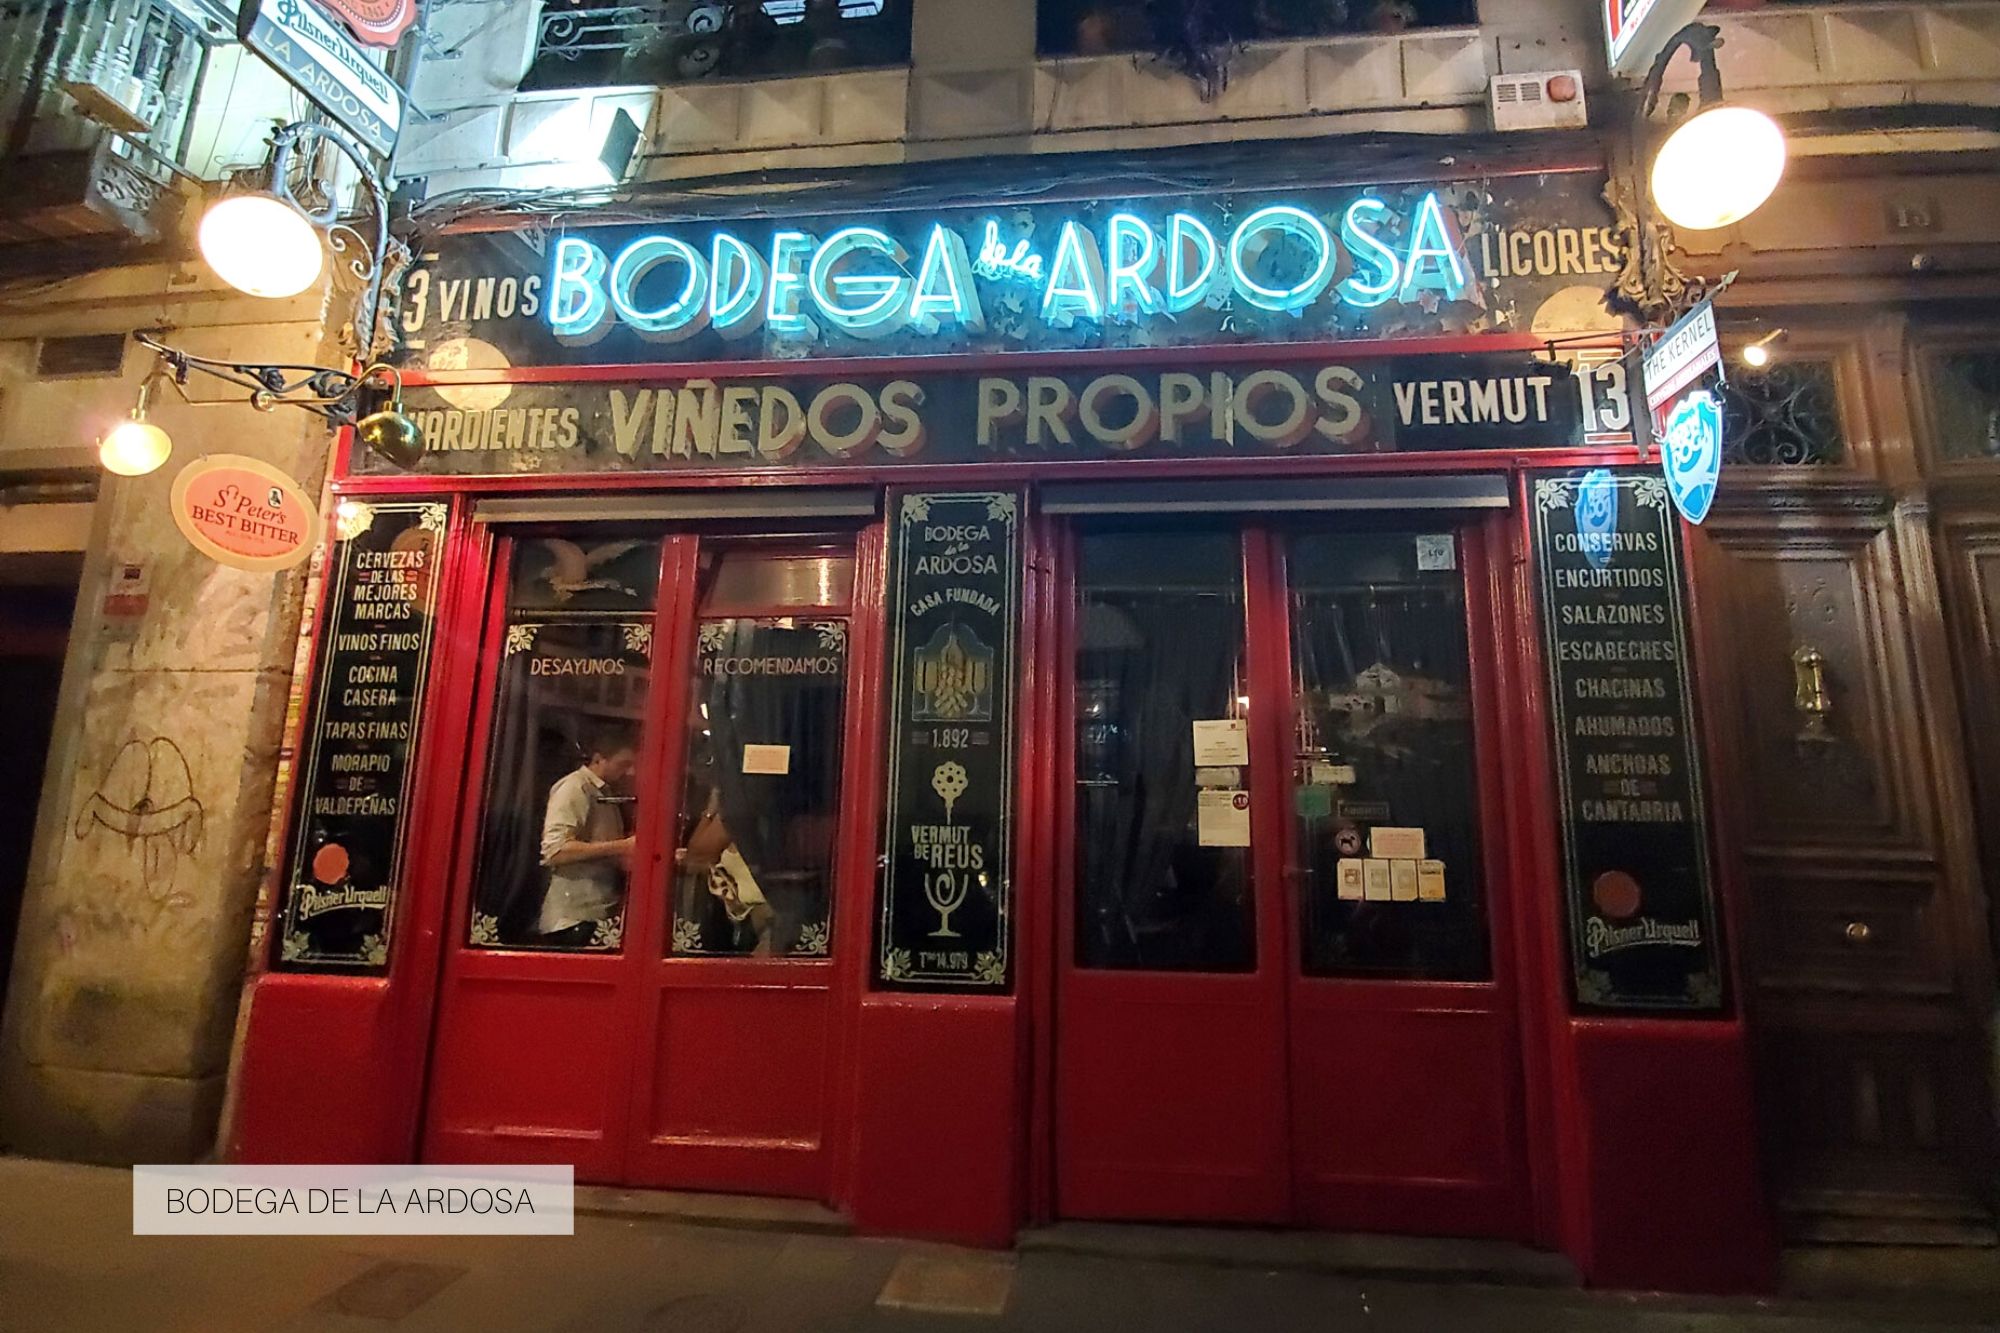 Exterior of Bodega de la Ardosa; it's busy inside and the lights are a neon blue